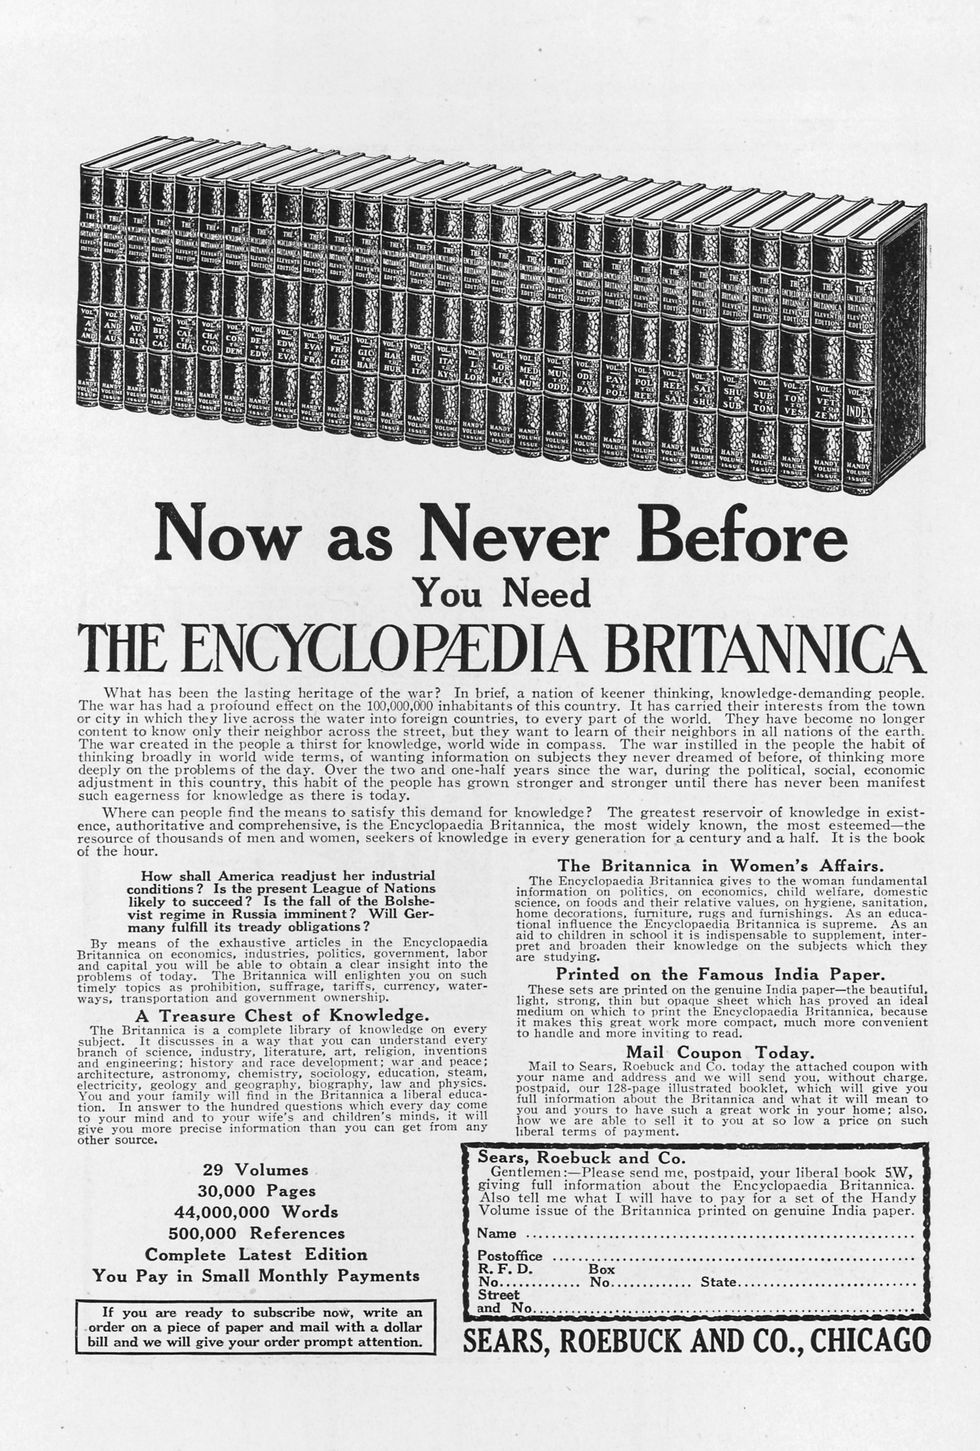 encyclopedia britannica, advertisement from the sears roebuck company, with image of a line of bound books, 1922 photo by smith collectiongadogetty images